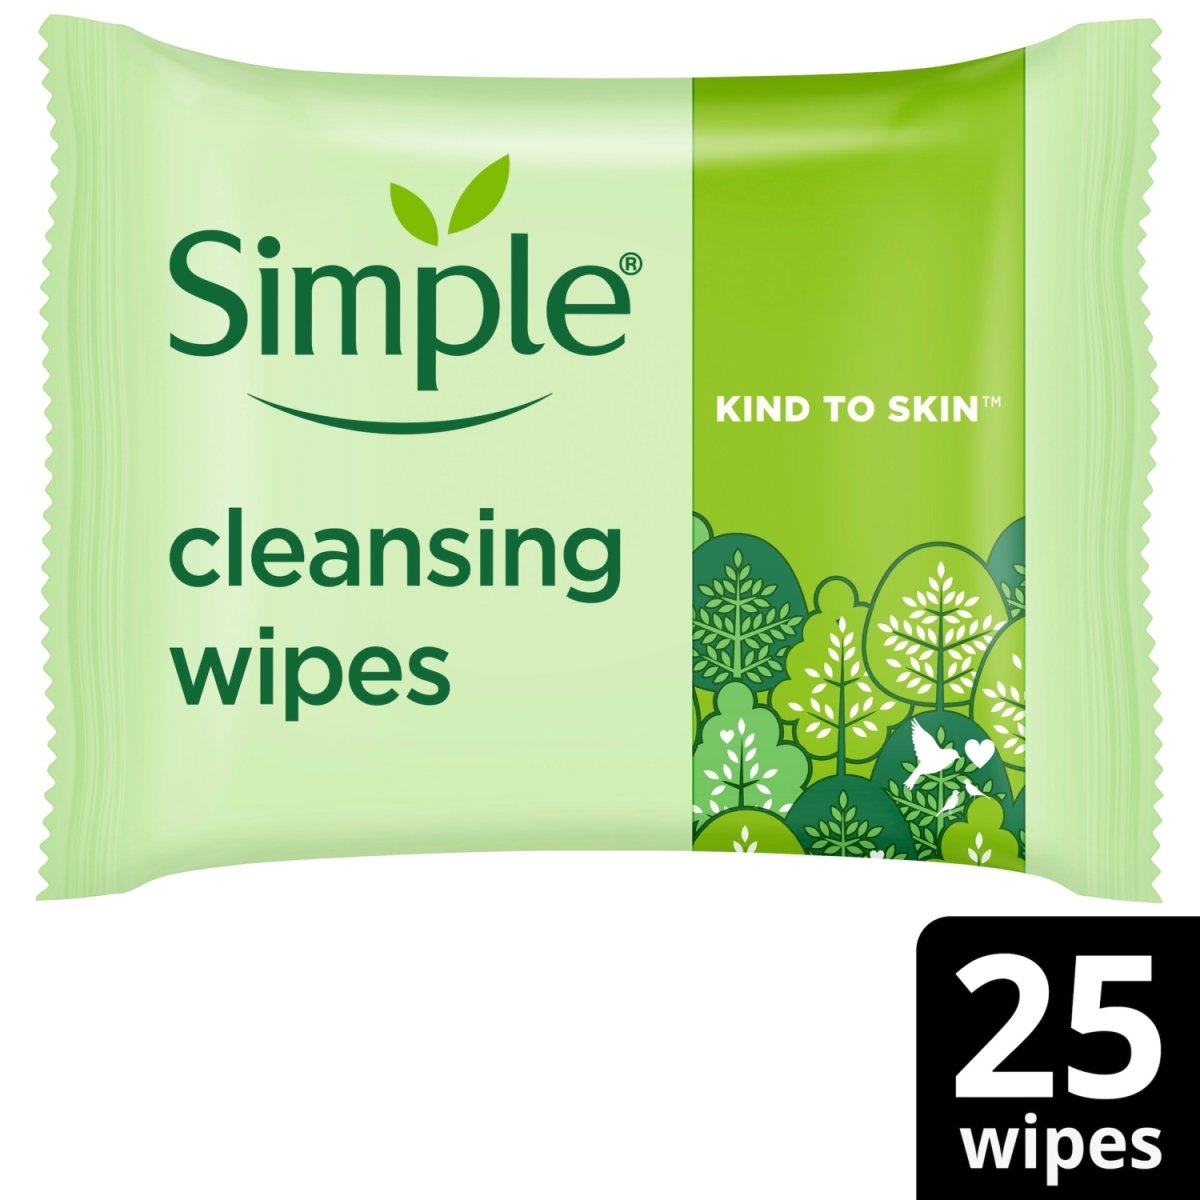 Simple Cleansing Face Wipes new biodegradable pack - Intamarque 8720181209444